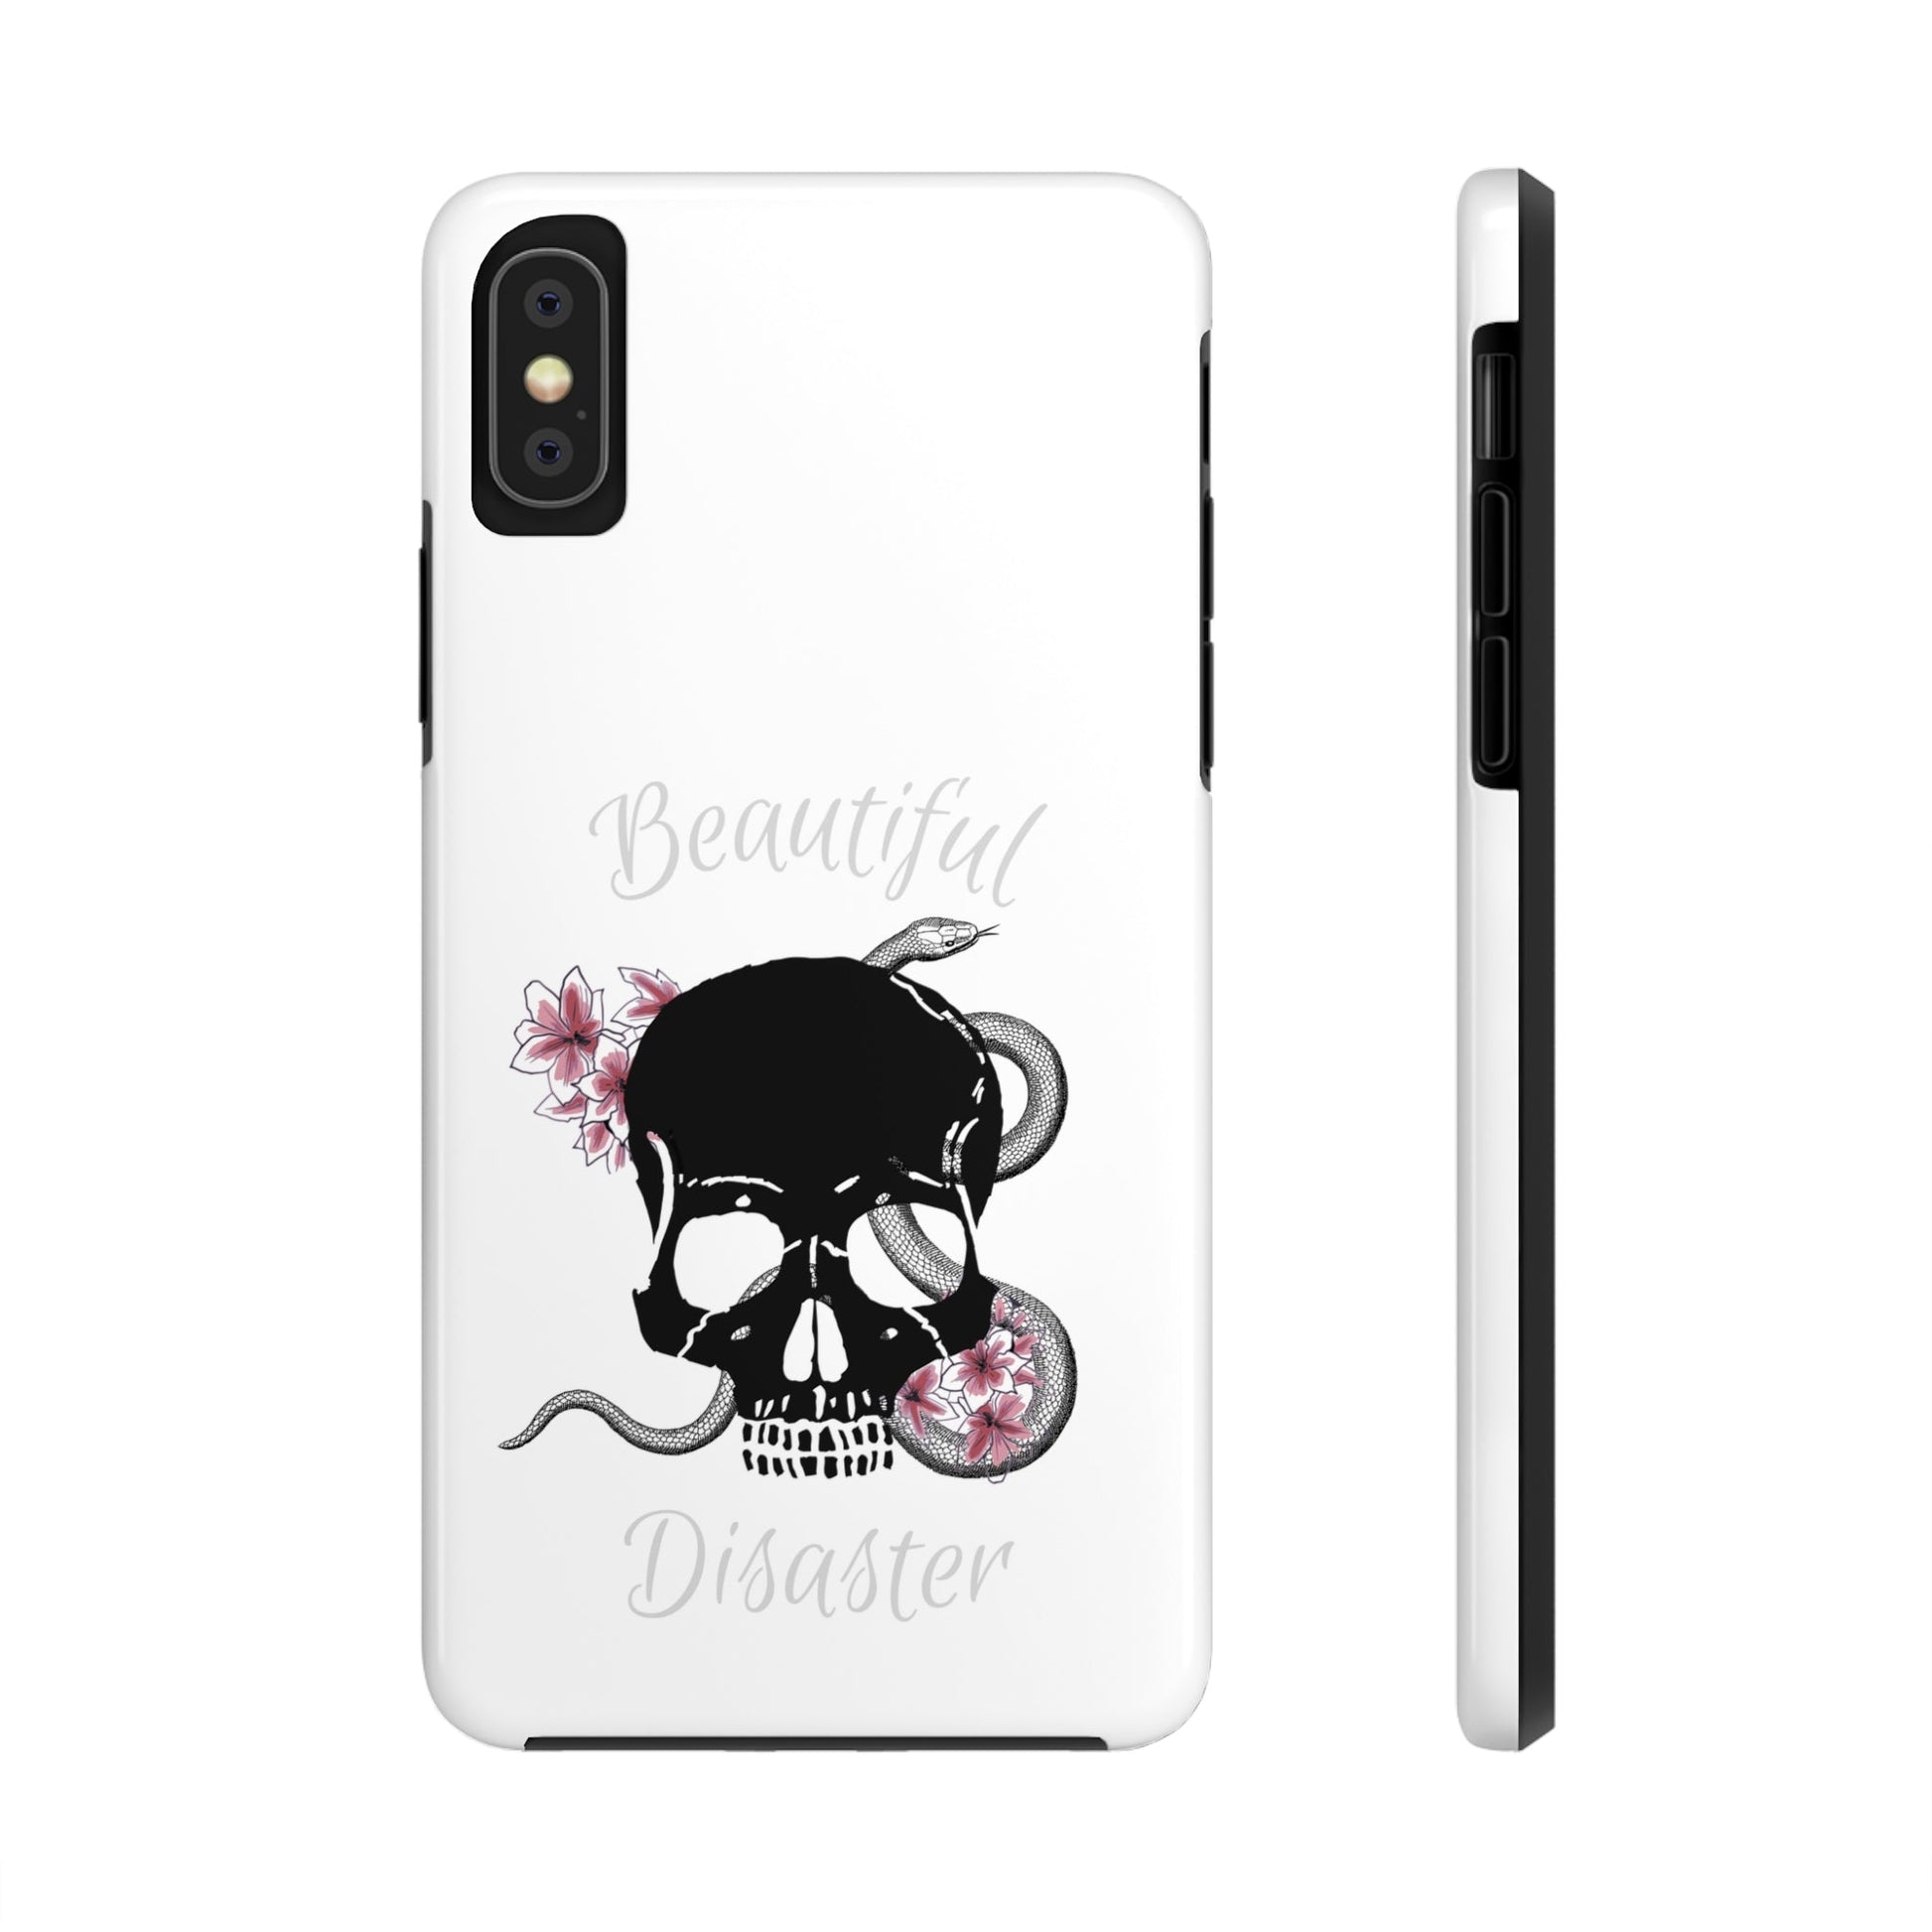 Beautiful Disaster Skull Rose Snake Tough Phone Cases iPhone 7, 8, X, 11, 12, 13, 14 & morePhone CaseVTZdesignsiPhone XAccessoriesGlossyiPhone Cases